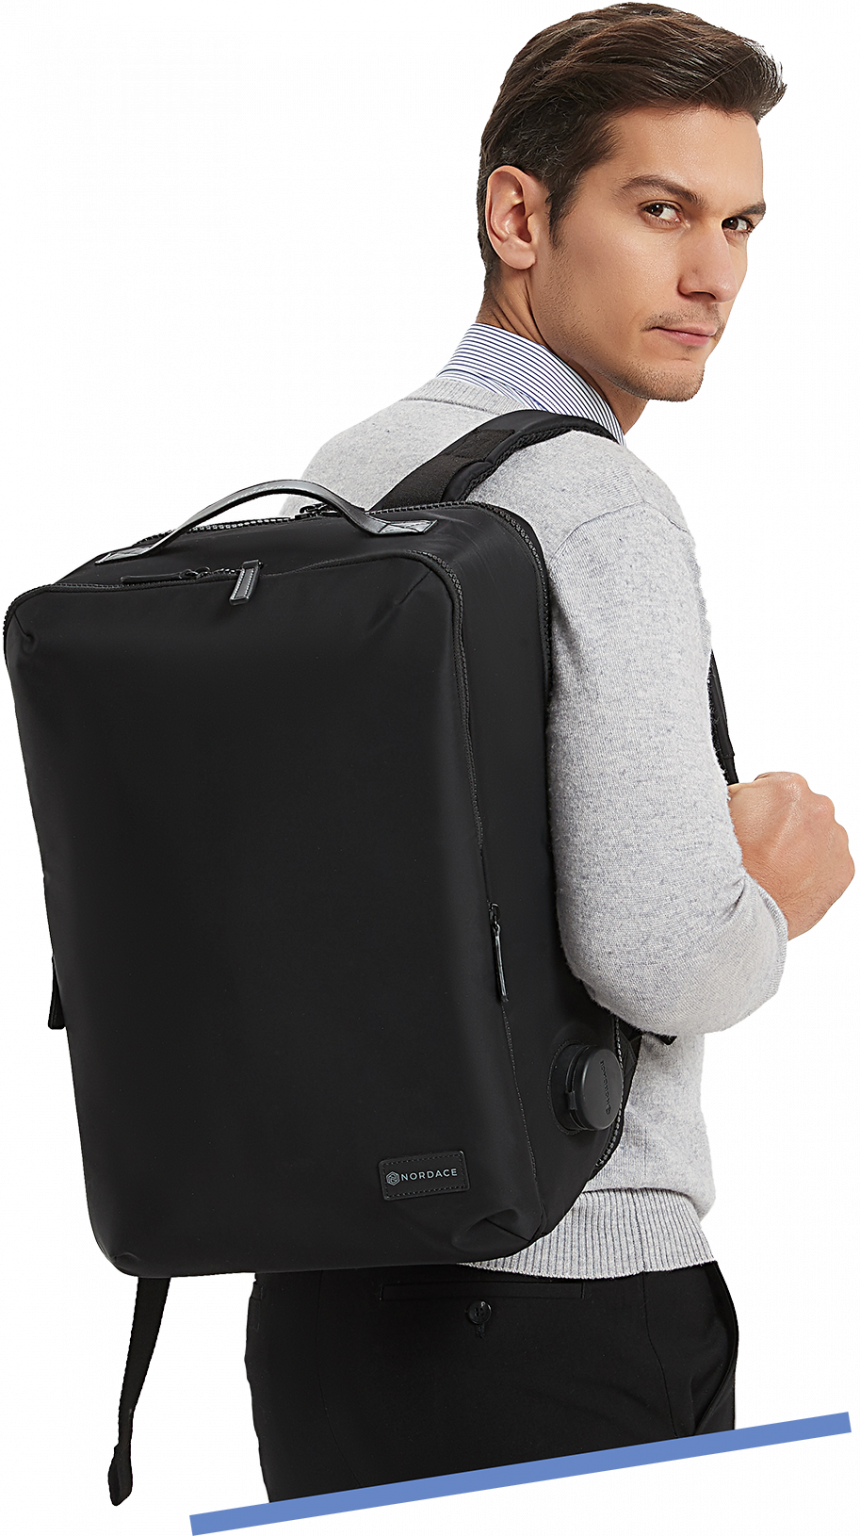 Nordace - Nordace Laval - The Best Backpack for Modern Business